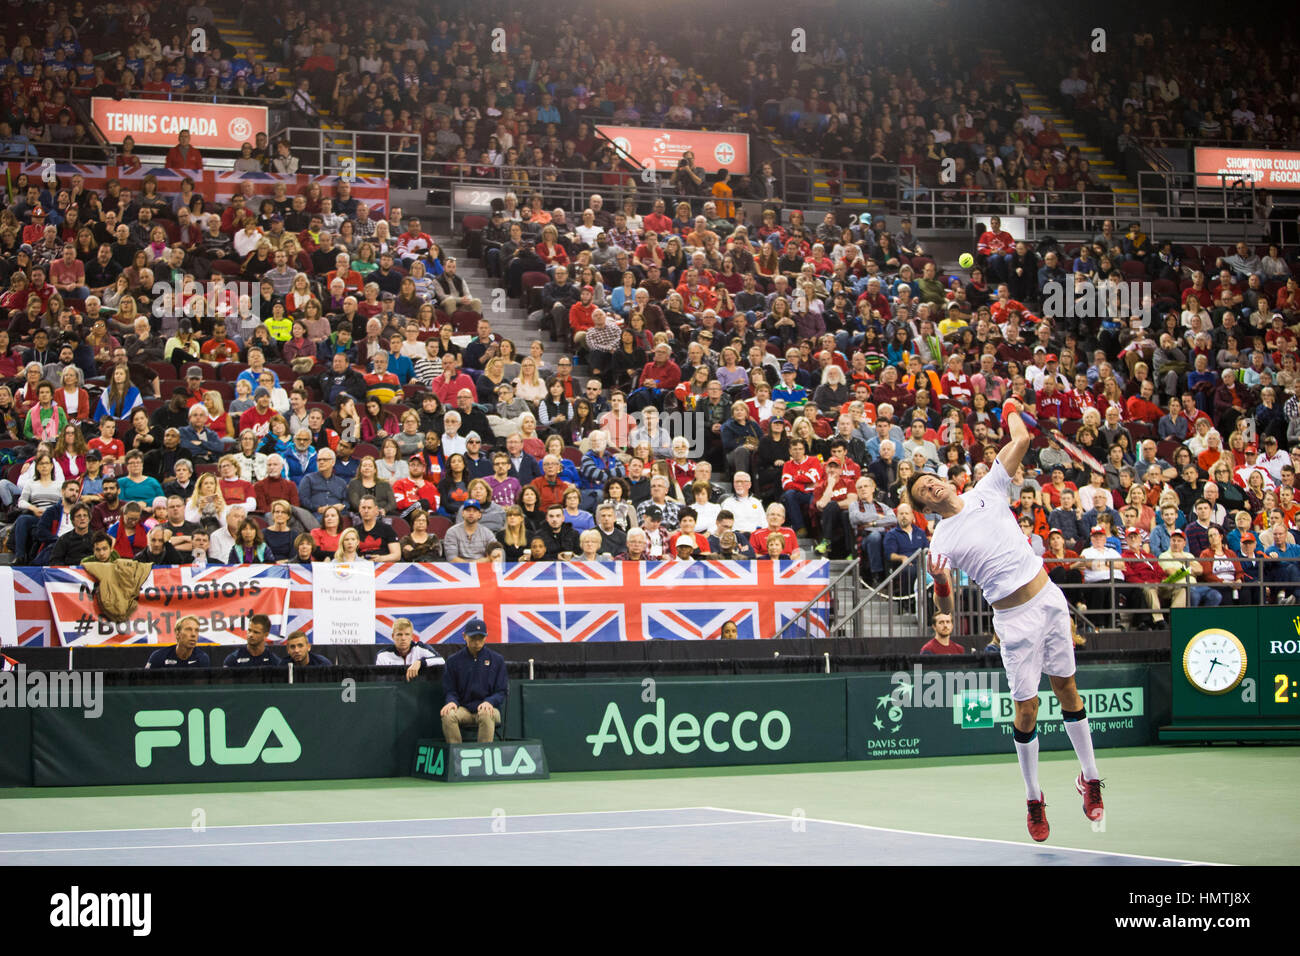 February 4th 2017, Ottowa, Canada;  Daniel Nestor of Canada serves against  Dominic Inglot and Jamie Murray of Great Britain in men's doubles play  during the Davis Cup first round match between Canada and Great Britain at TD Place Arena in Ottawa, Canada Stock Photo